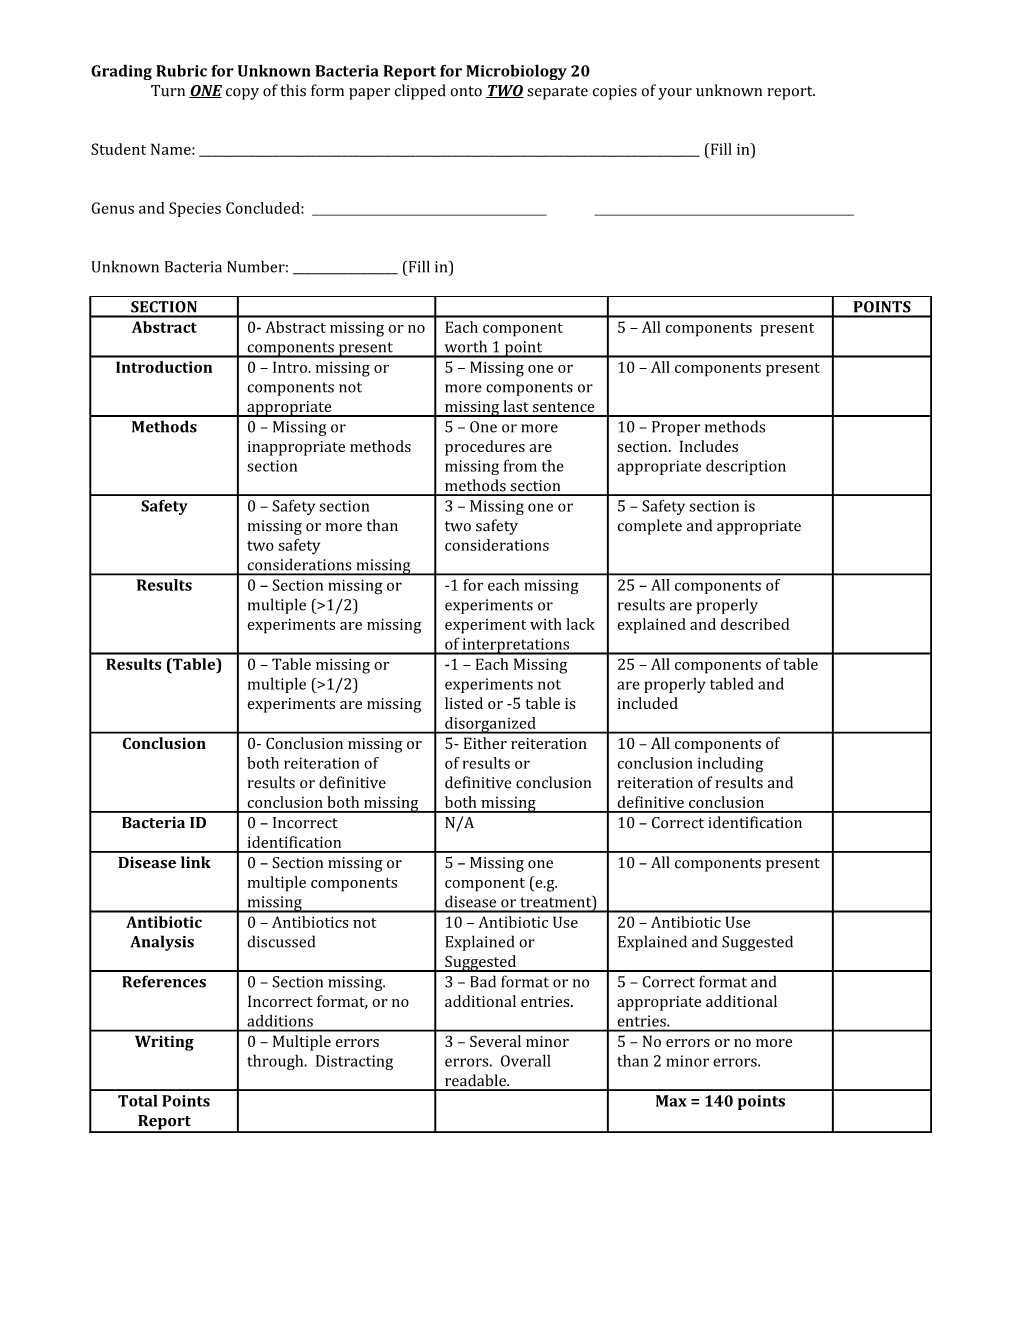 Grading Rubric for Unknown Bacteria Report for Microbiology 20